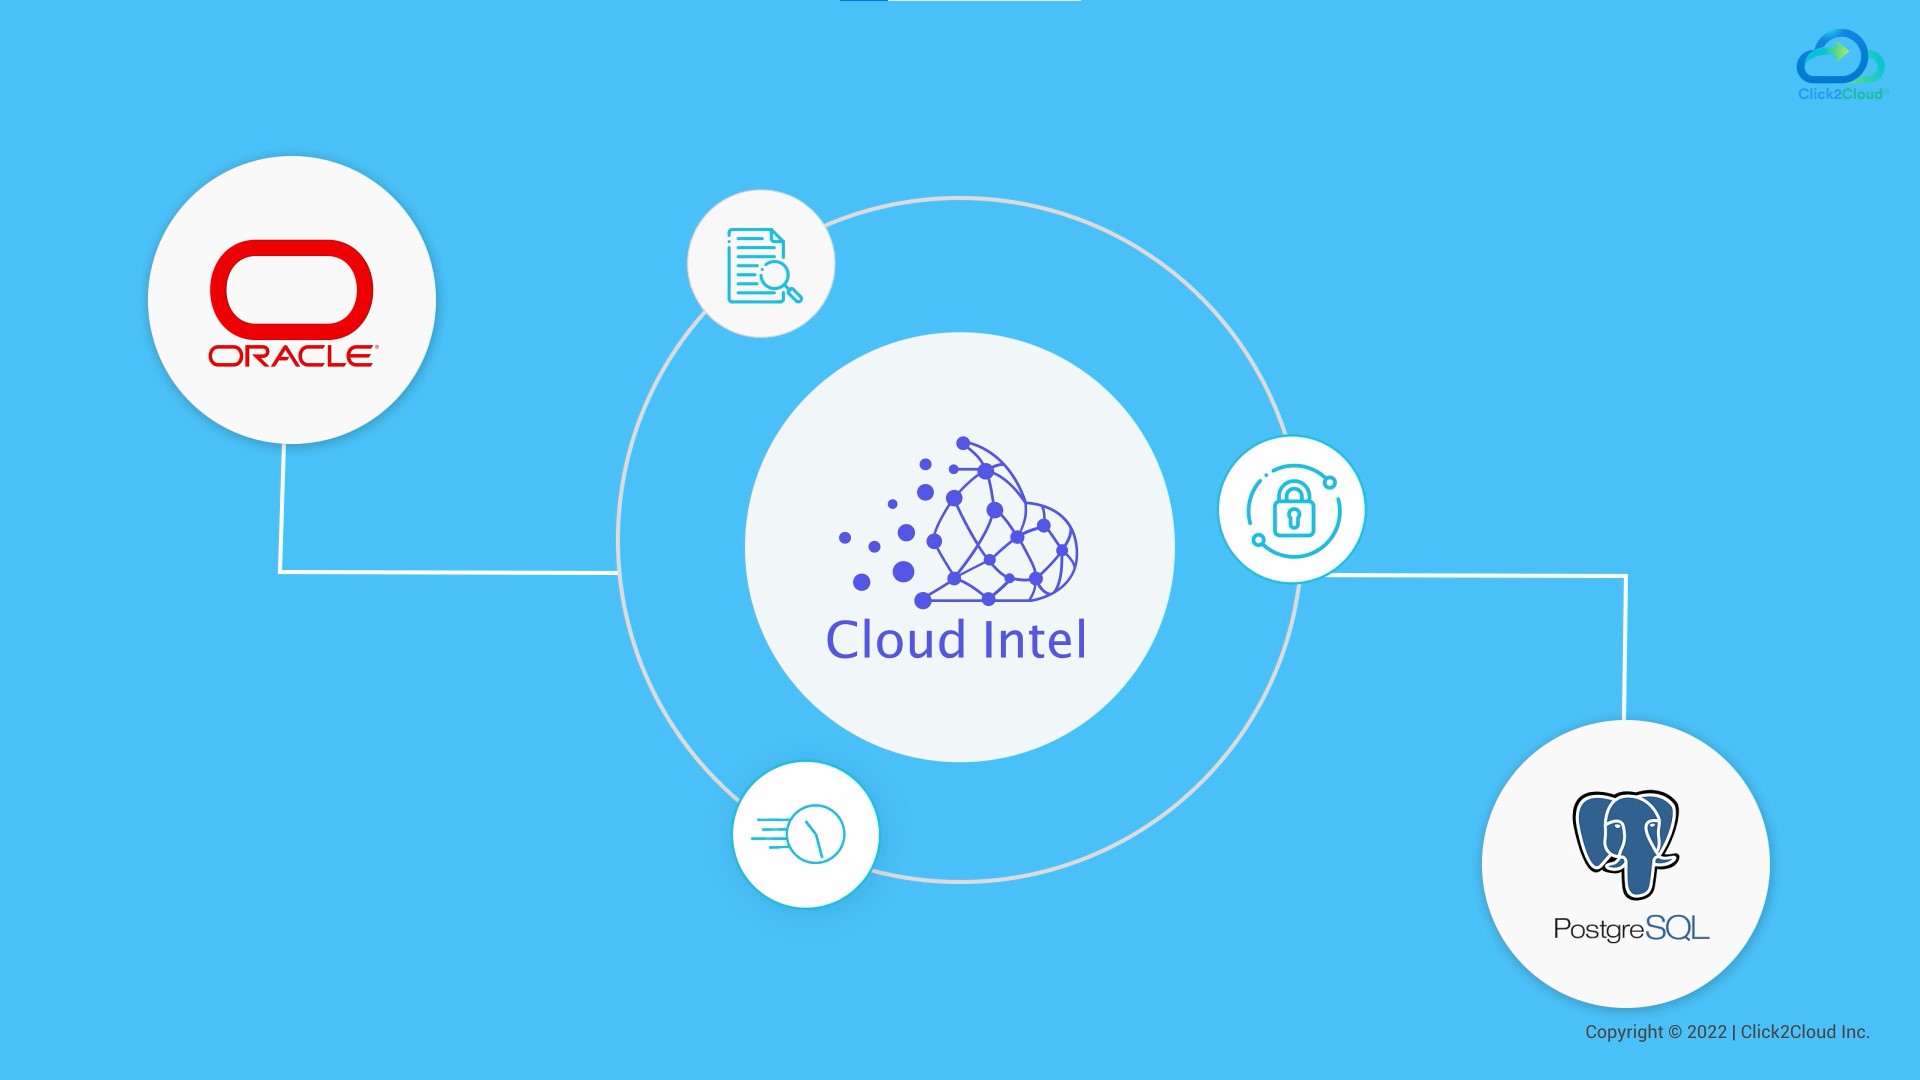 Oracle to PostgreSQL Migration Assessment with Cloud Intel-Click2Cloud